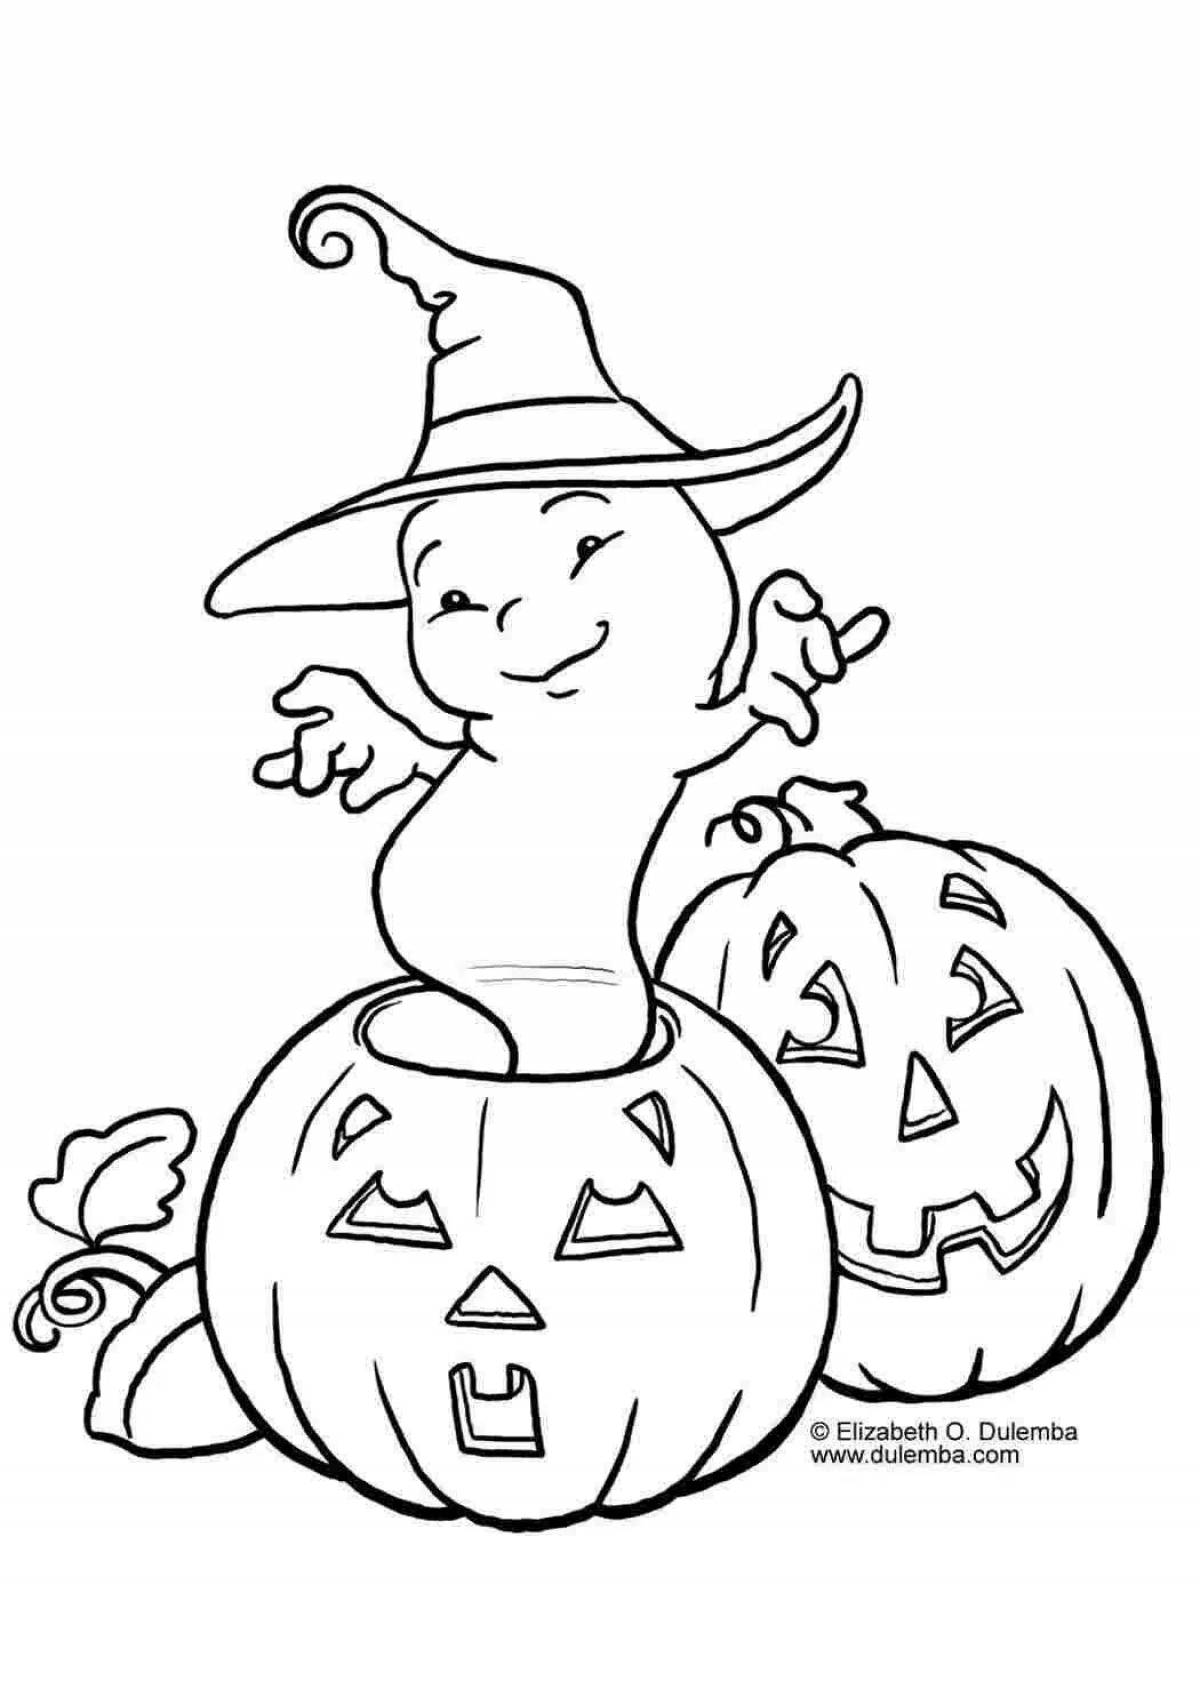 Chilling halloween coloring book